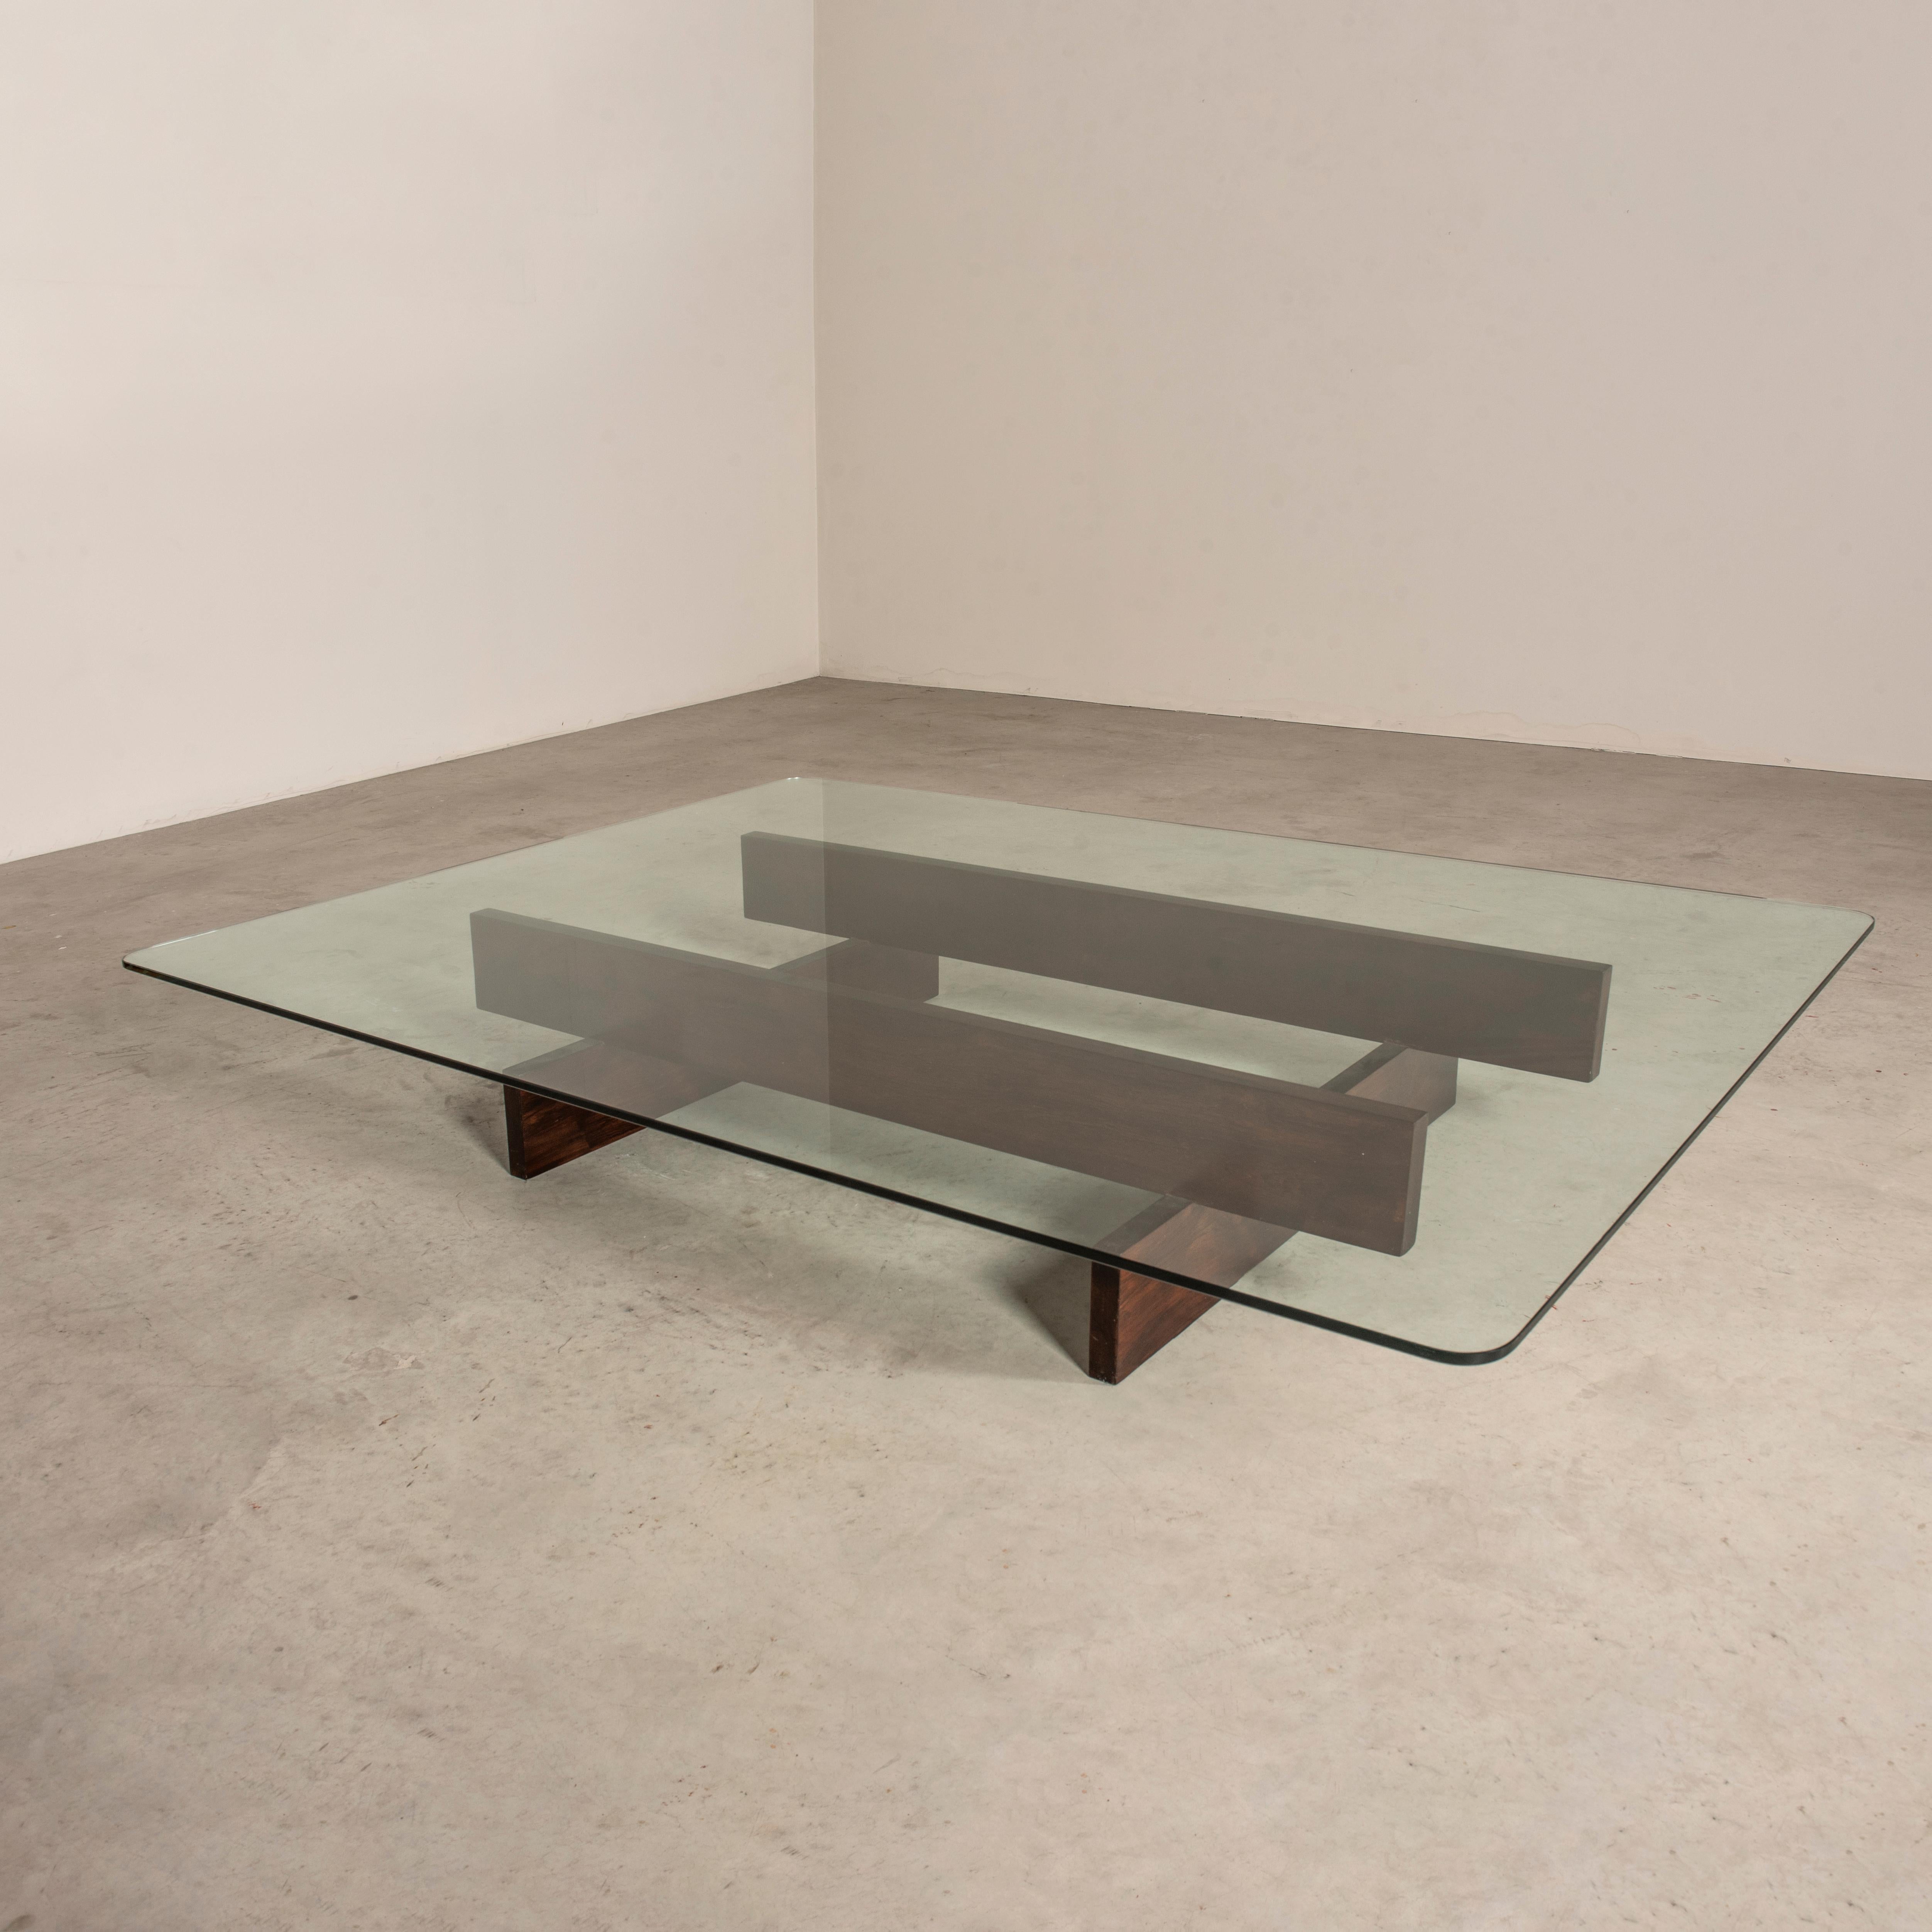 Grand Coffee Table in Wood and Glass by Celina Decorações, Brazilian Midcentury For Sale 4